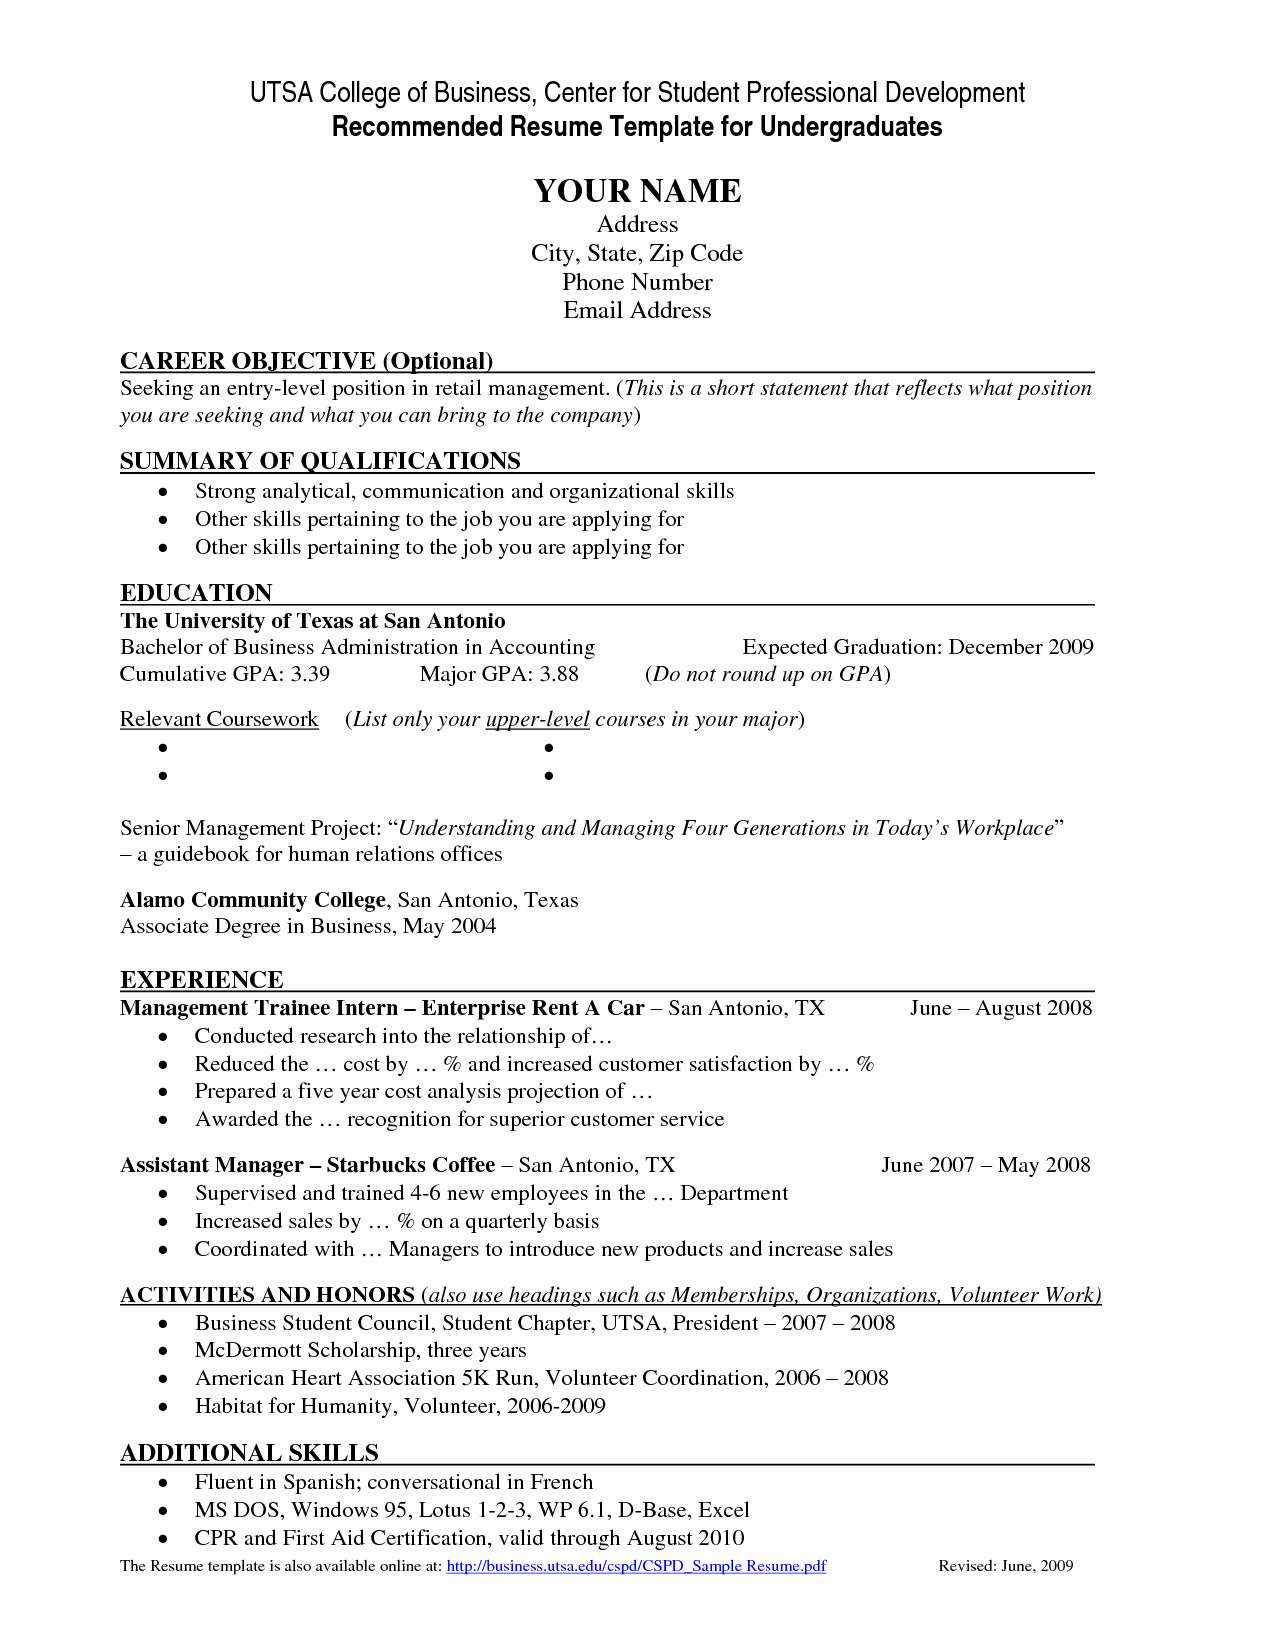 Resume Template for College Students